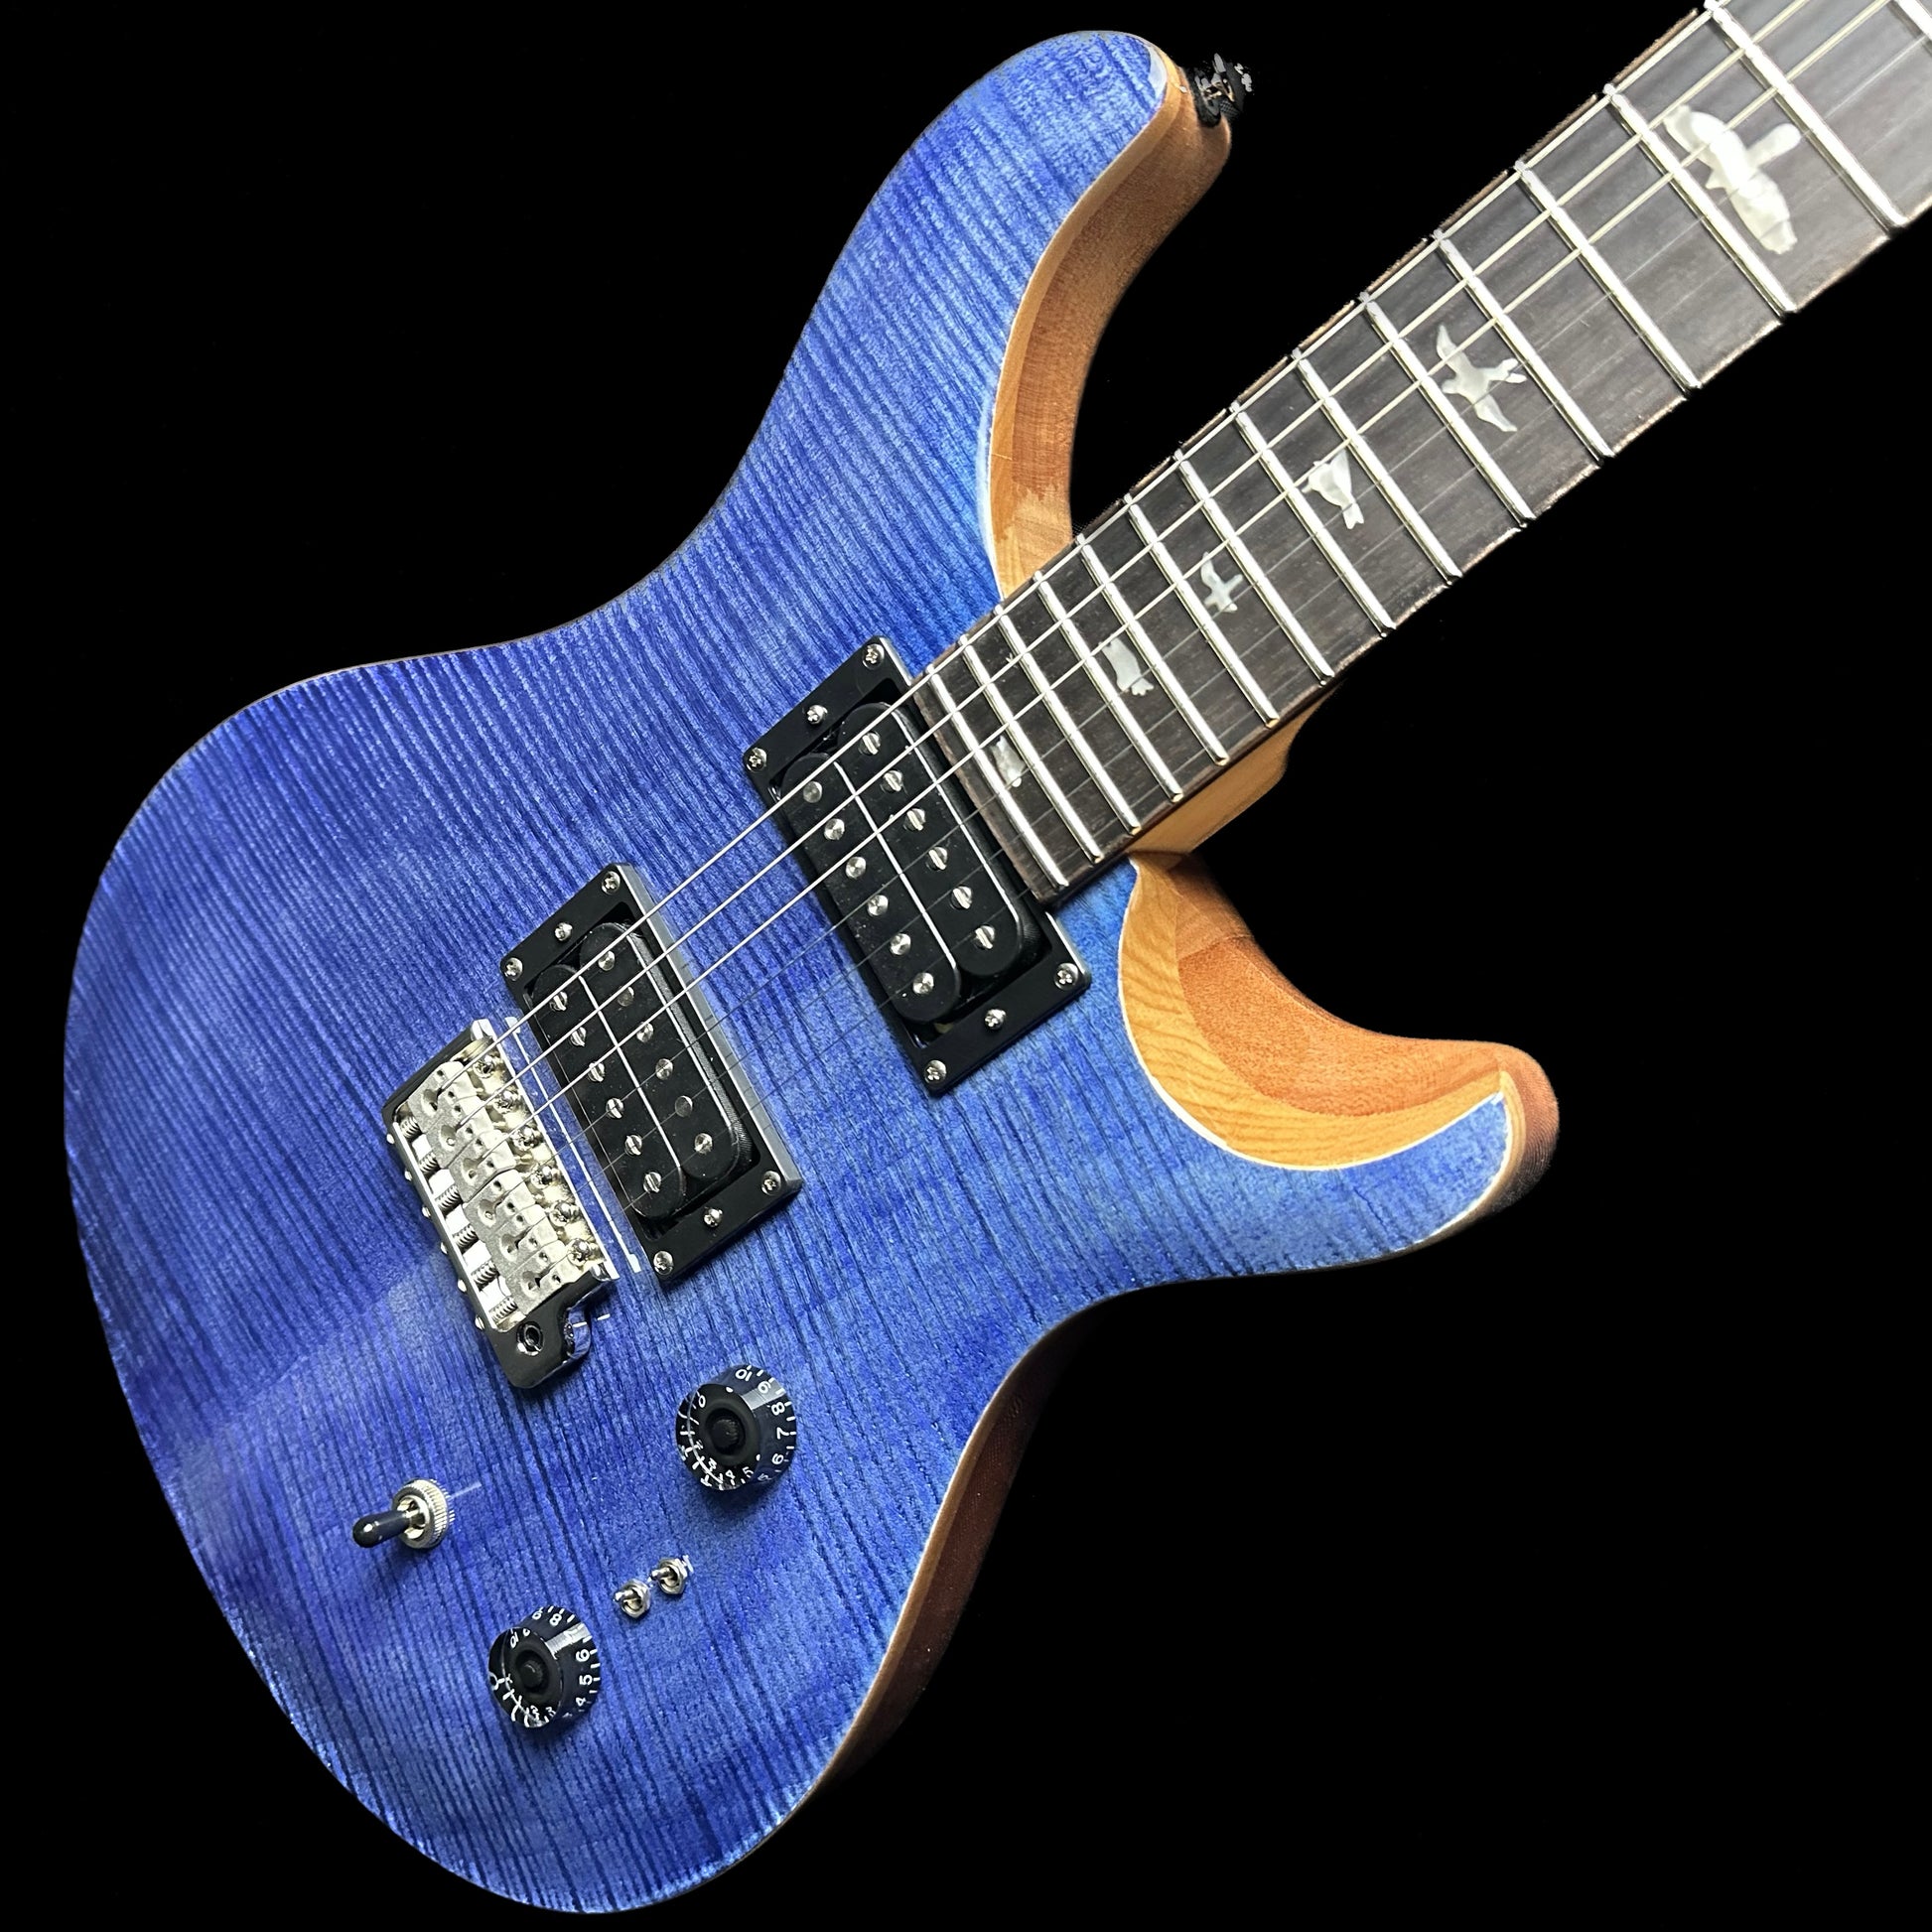 Top down angle of PRS Paul Reed Smith SE Custom 24-08 Faded Blue.